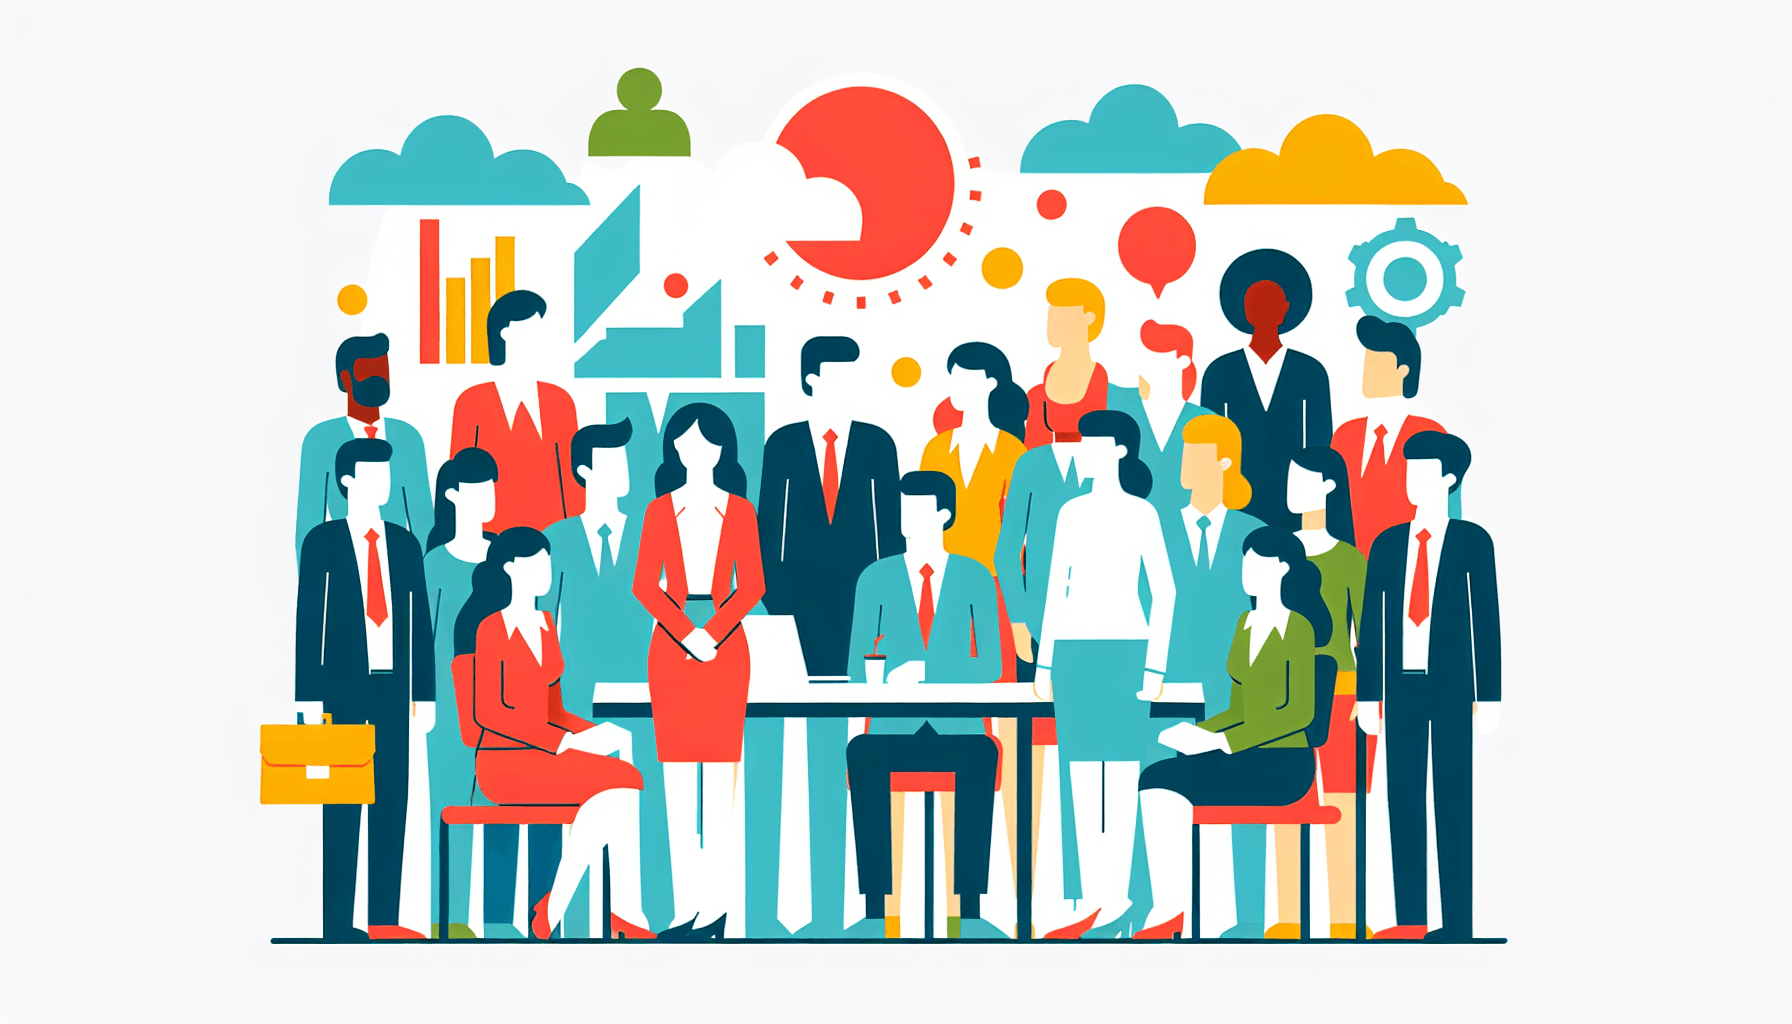 Business in flat illustration style and white background, red #f47574, green #88c7a8, yellow #fcc44b, and blue #645bc8 colors.